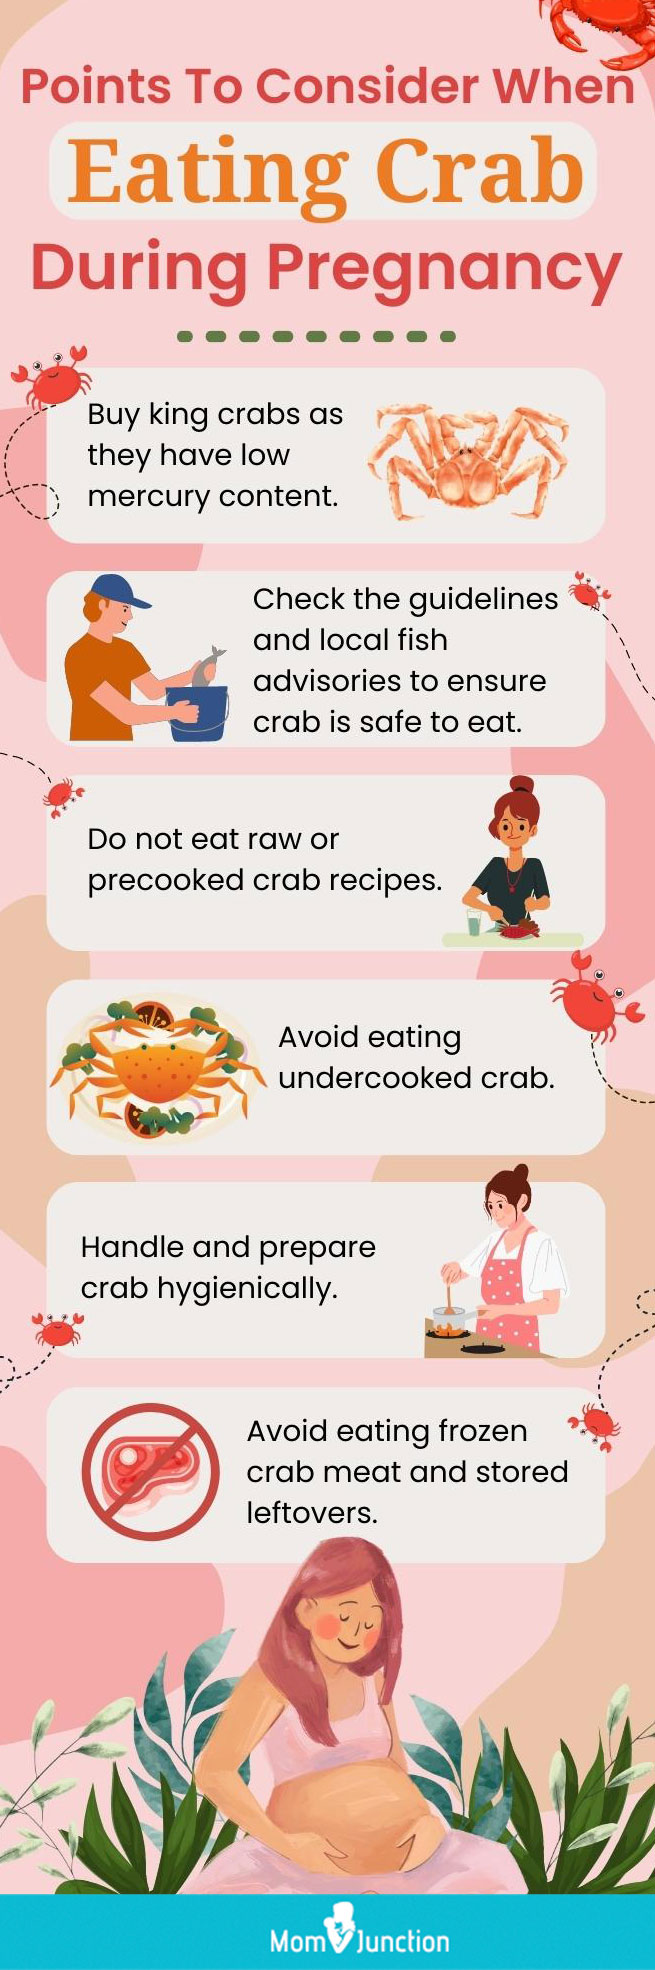 points to consider when eating crab during pregnancy (infographic)